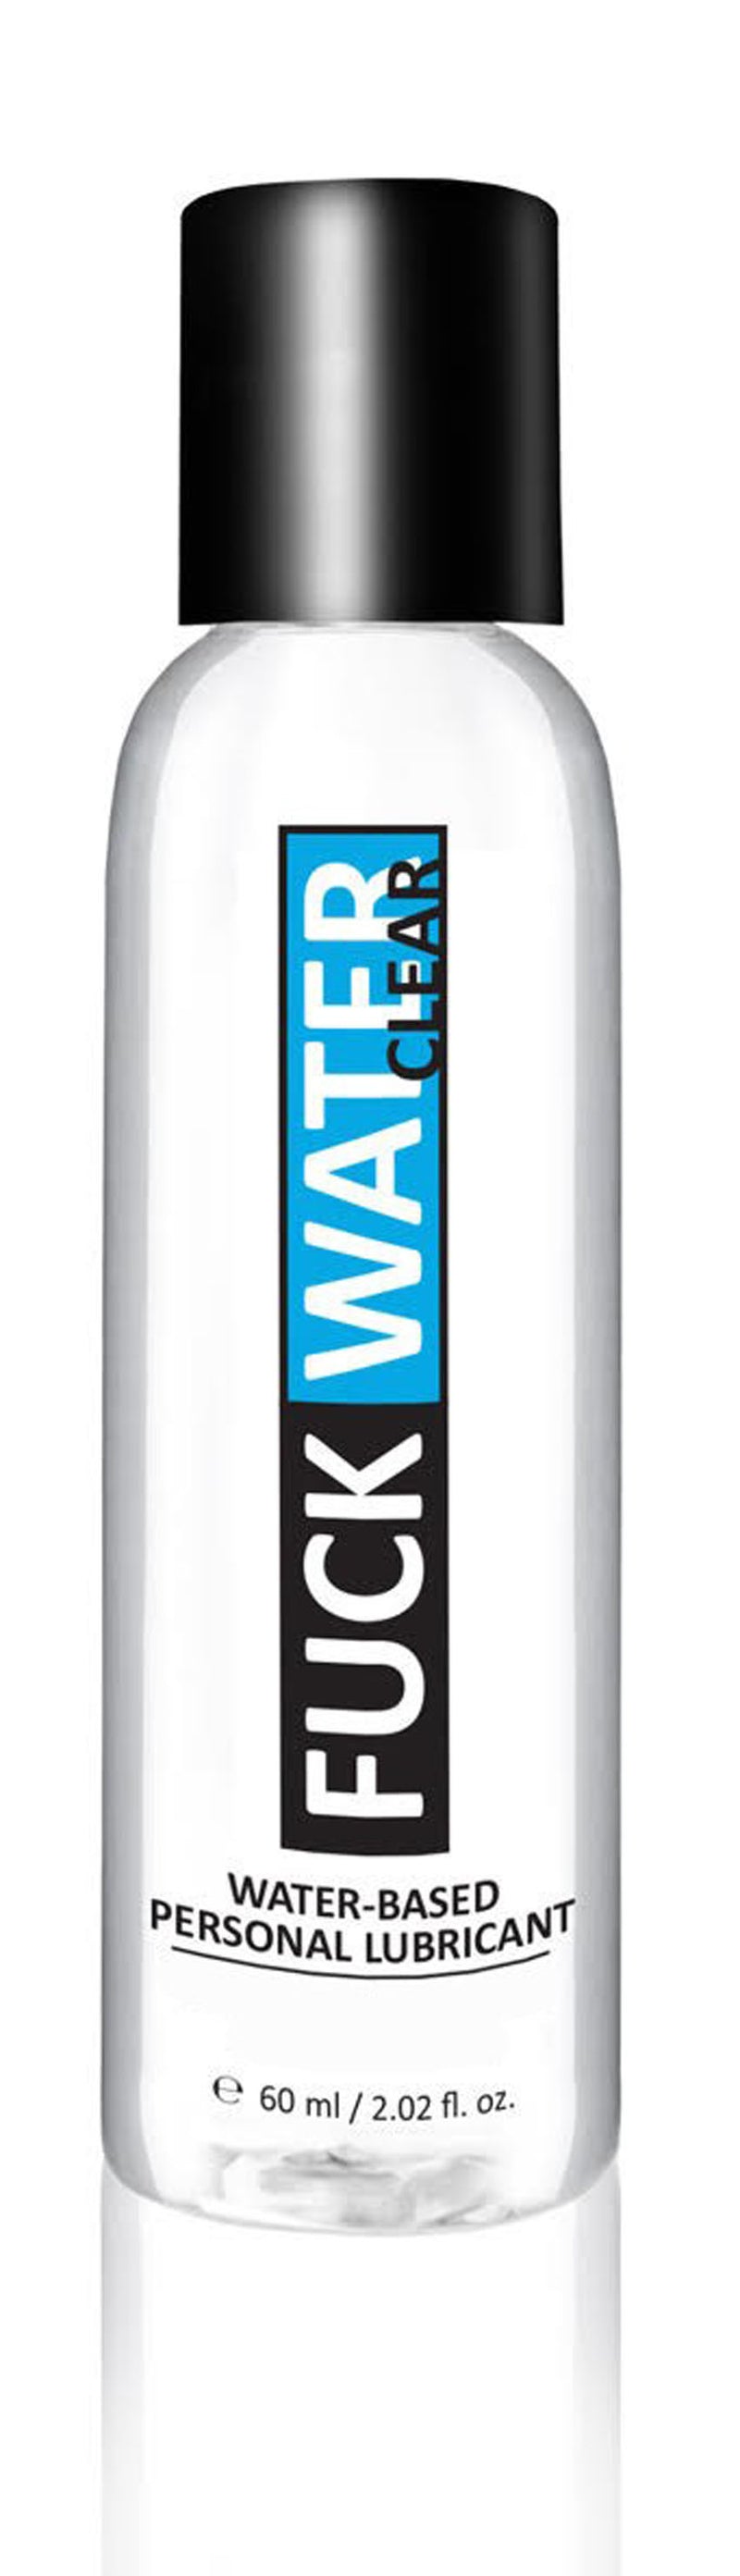 Enhance Your Intimate Activities with Fragrance-Free Fuck Water Clear Lubricant - Condom Compatible